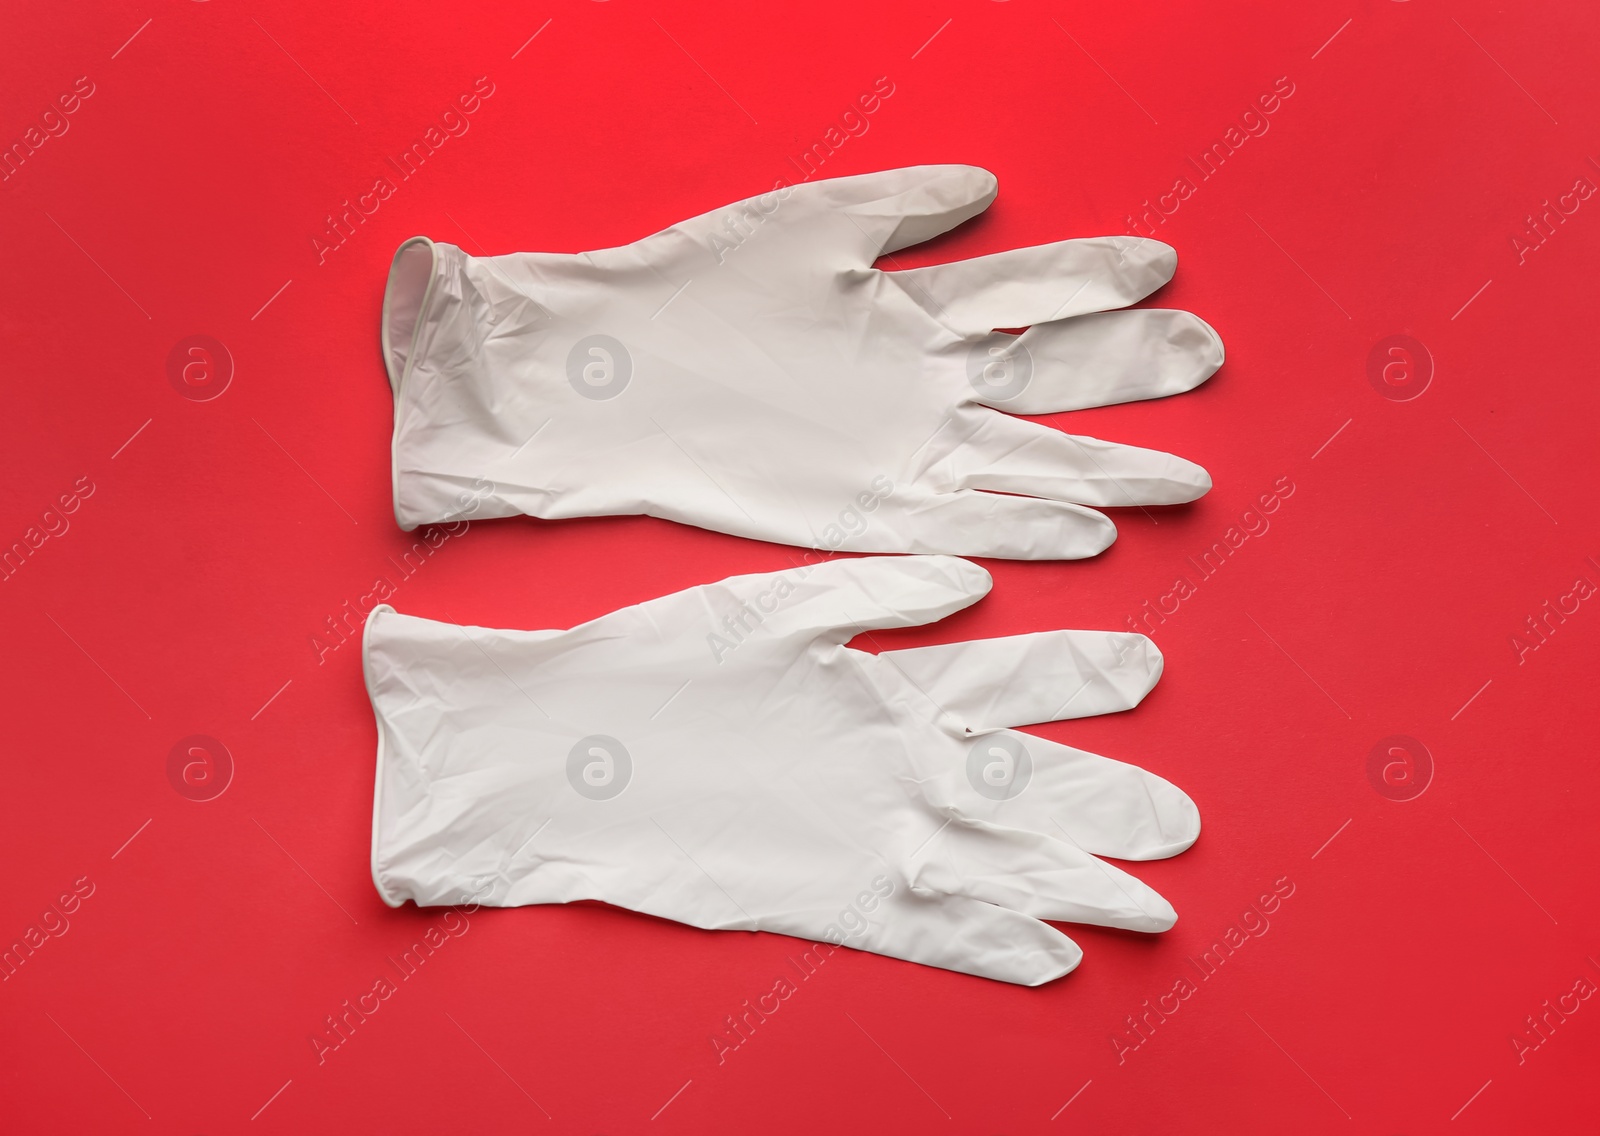 Photo of Pair of medical gloves on red background, flat lay